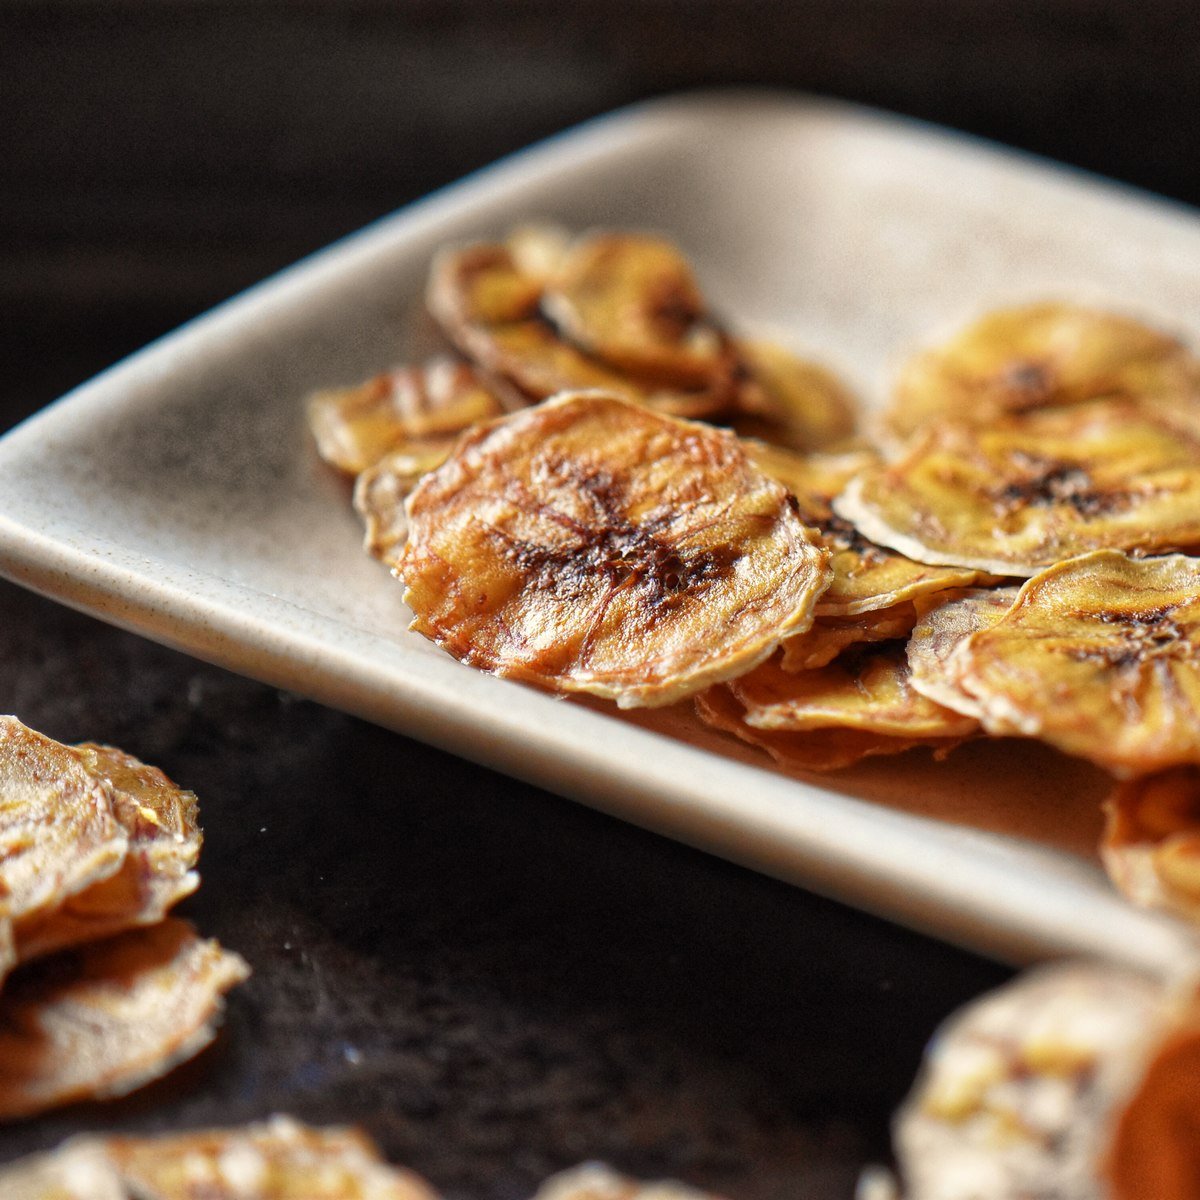 Baked banana chips placed on a white serving dish.